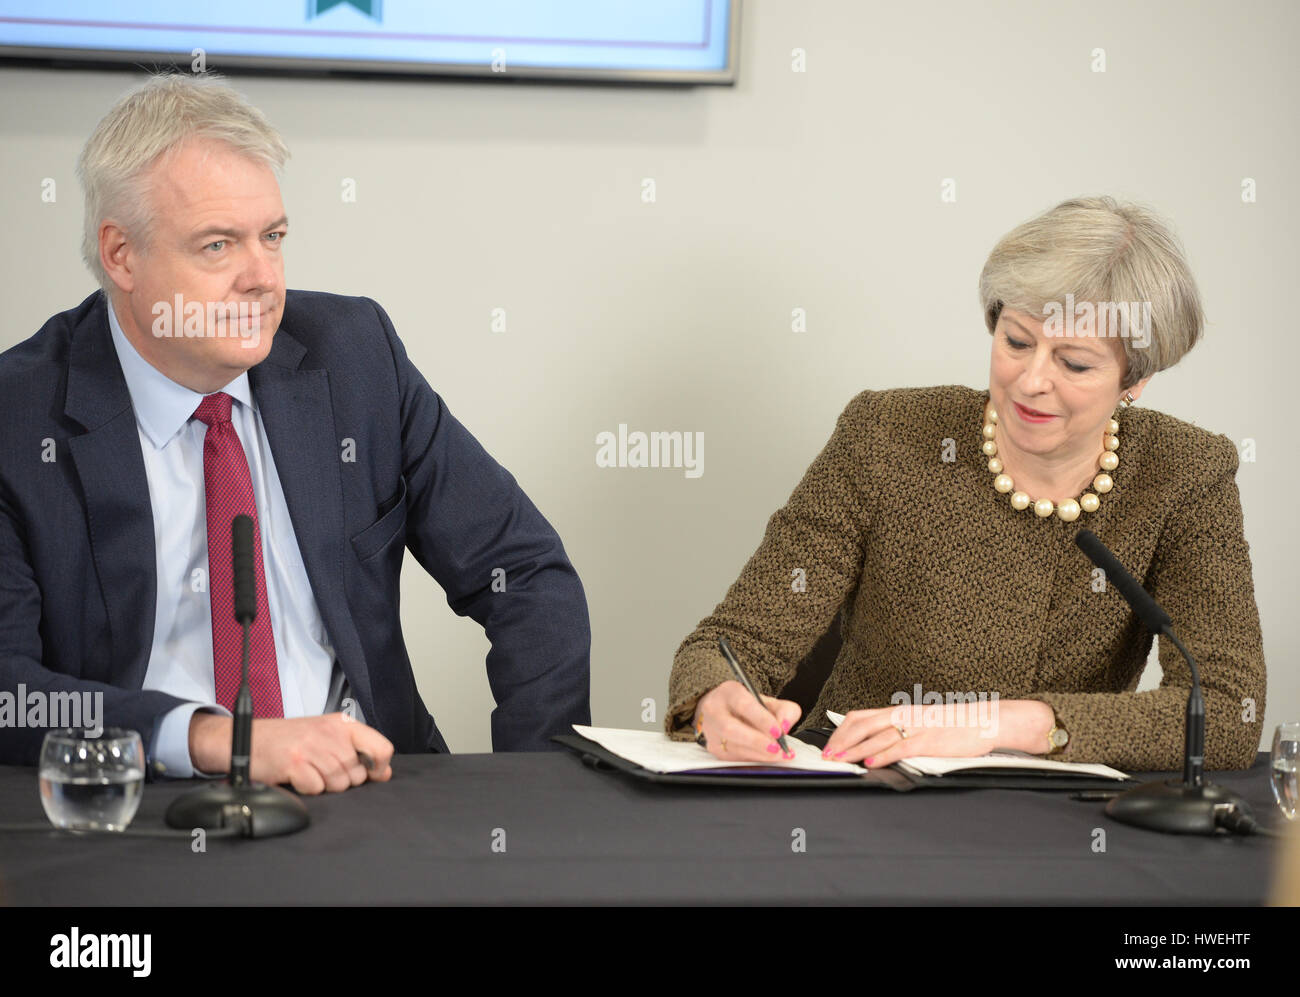 Prime Minister Theresa May (right) and First Minister Carwyn Jones sign a Swansea City deal during a meeting at the Liberty Stadium in Swansea, as she faces pressure to keep the union together in the wake of the divisive Brexit vote. Stock Photo